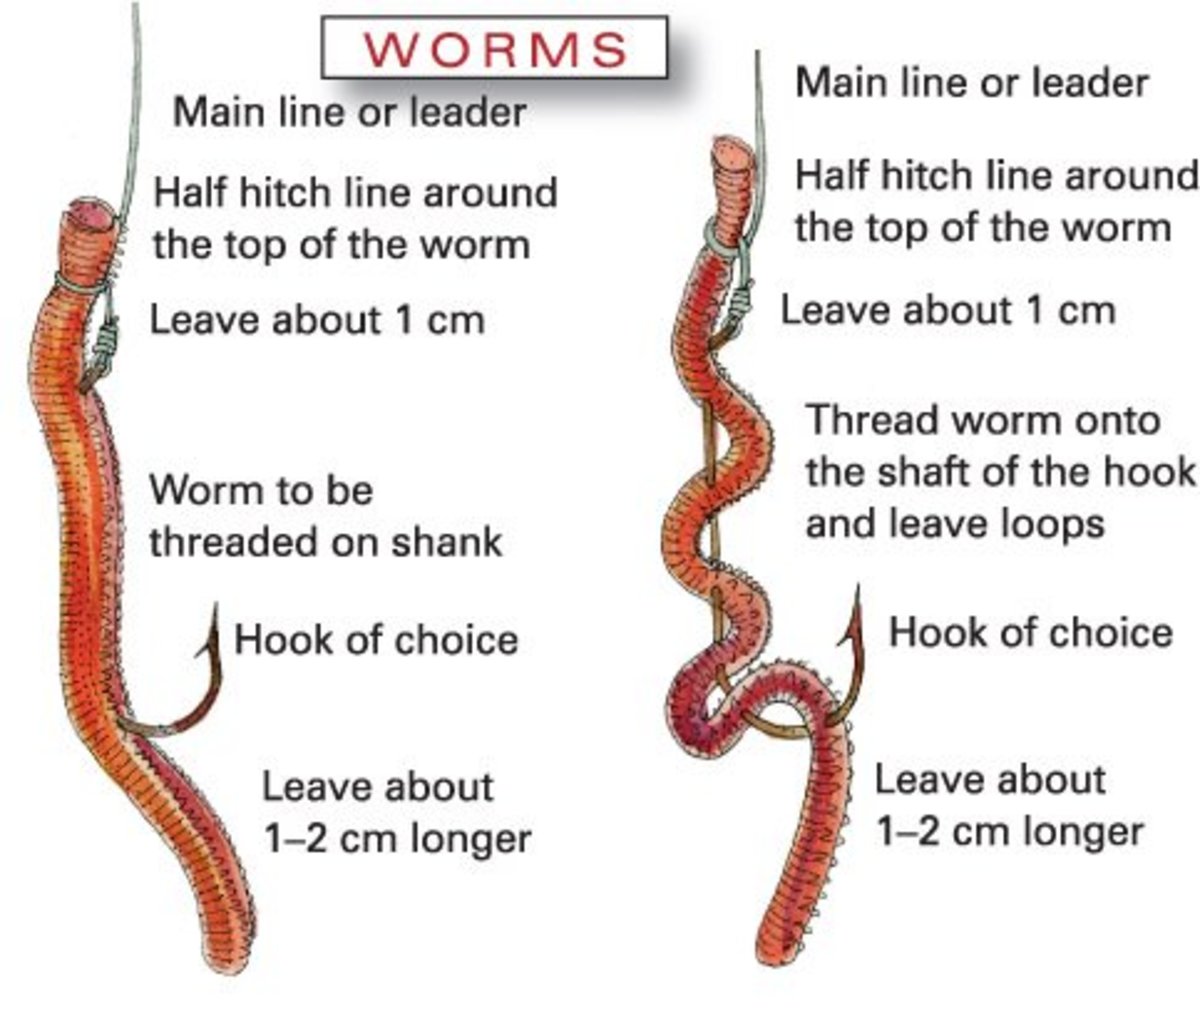 How do worms reproduce?